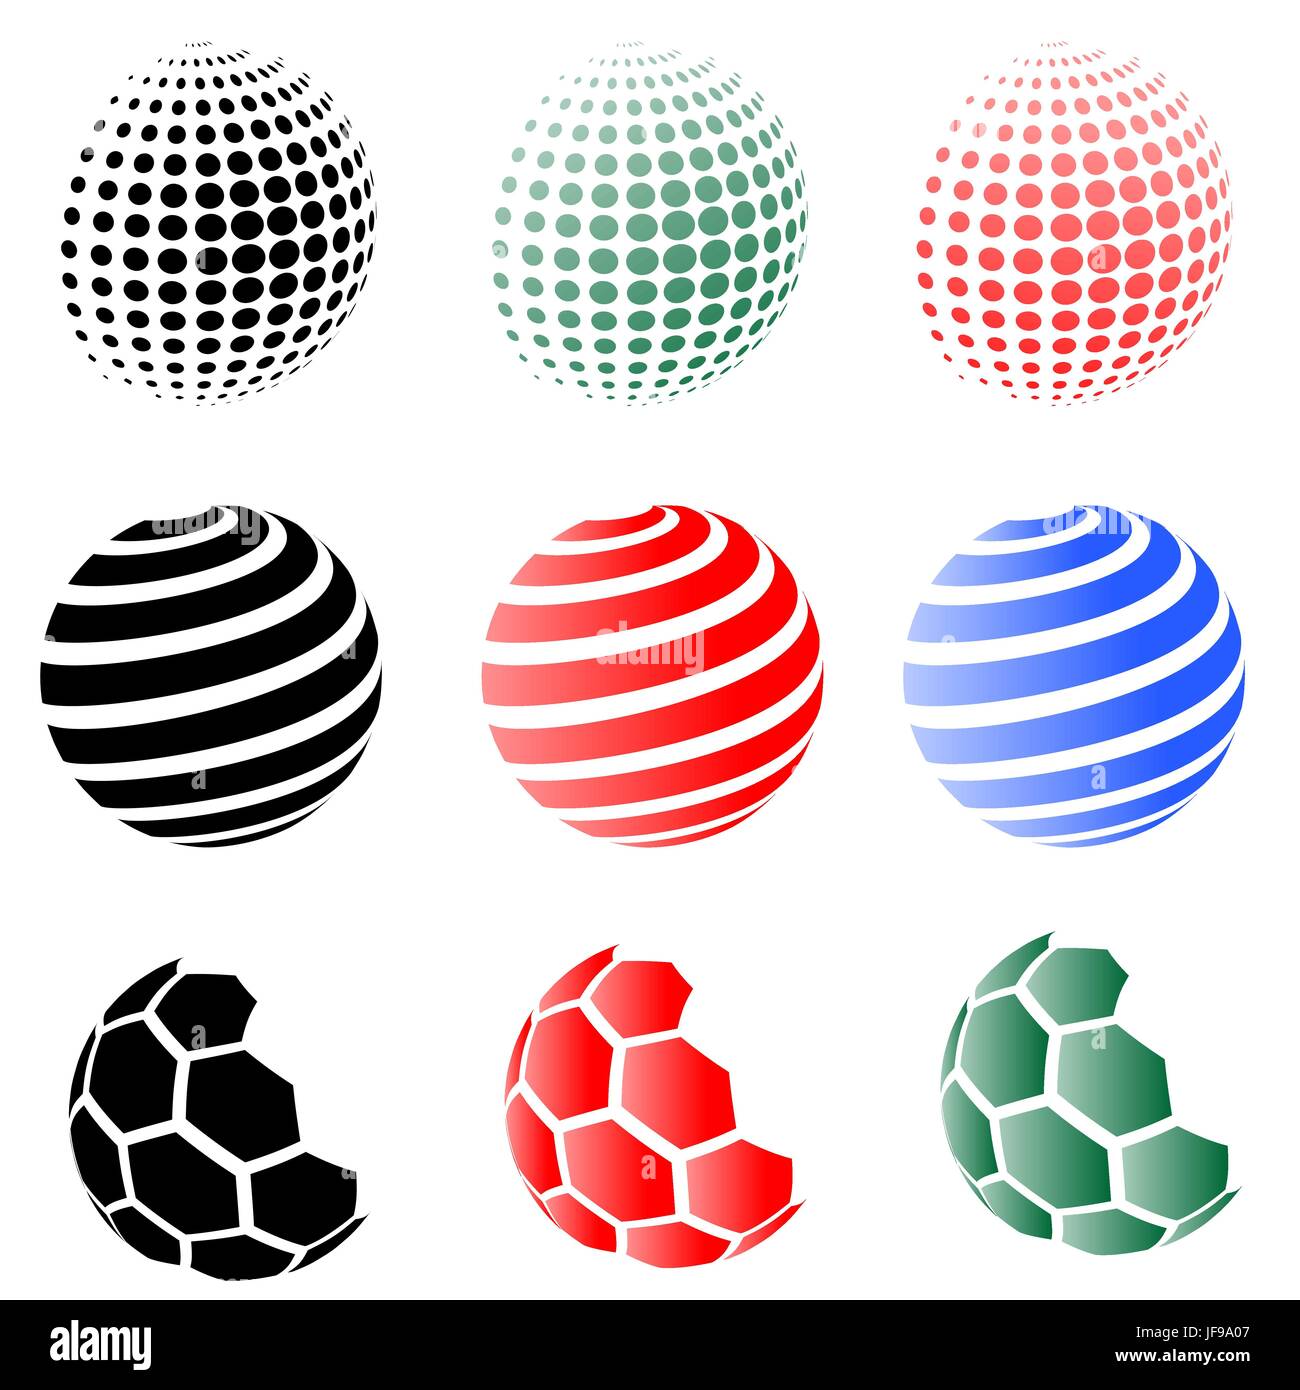 Set of Different Spheres Isolated on White Background Stock Vector